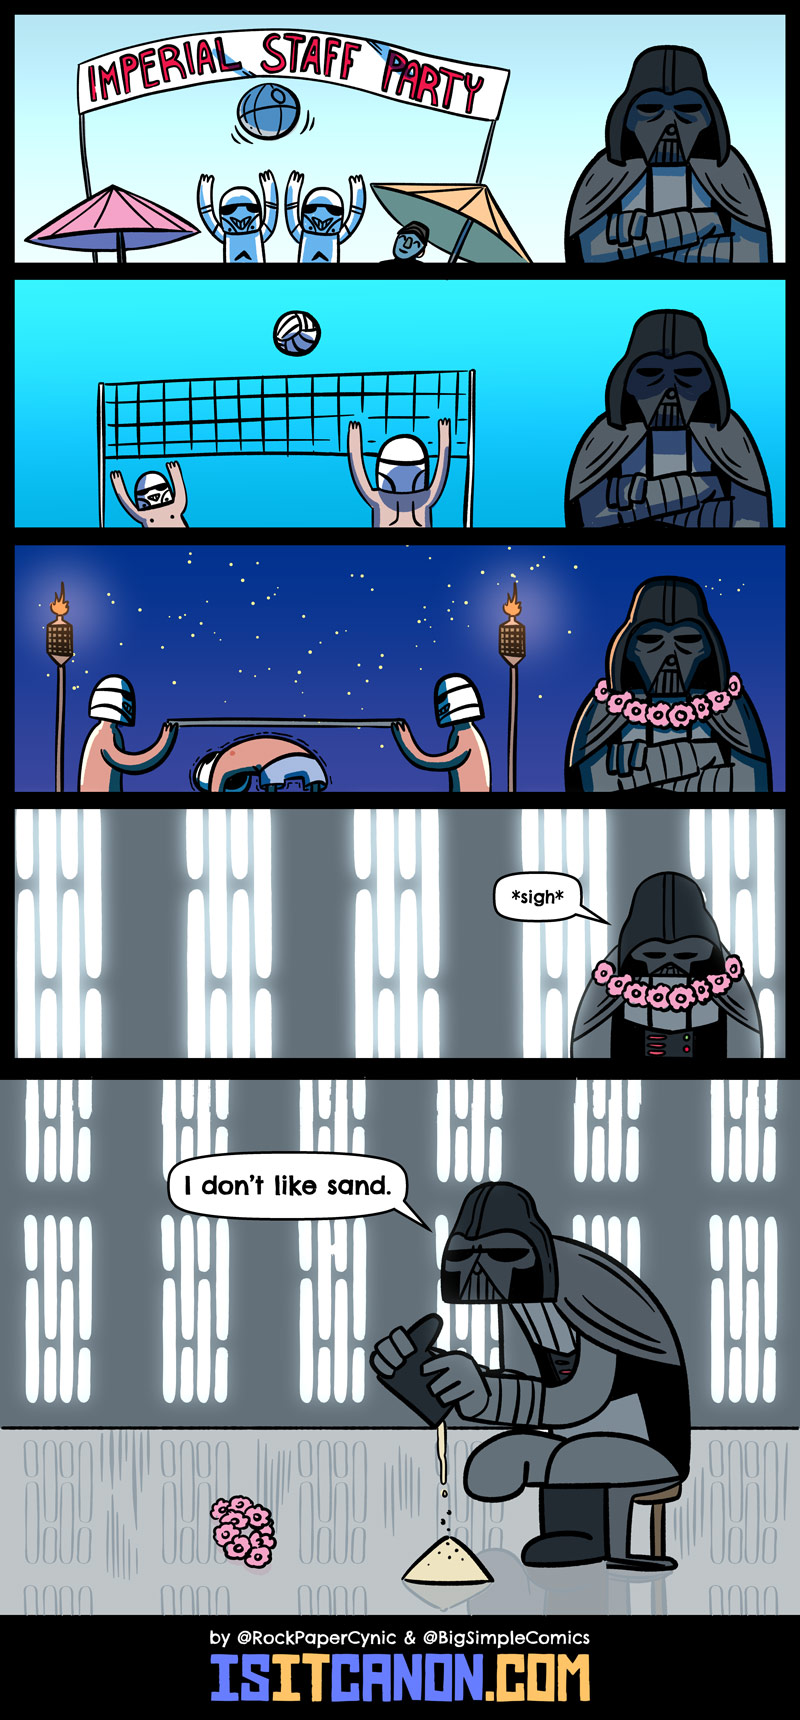 In this comic, Darth Vader has to go the Imperials' annual company retreat at the beach.